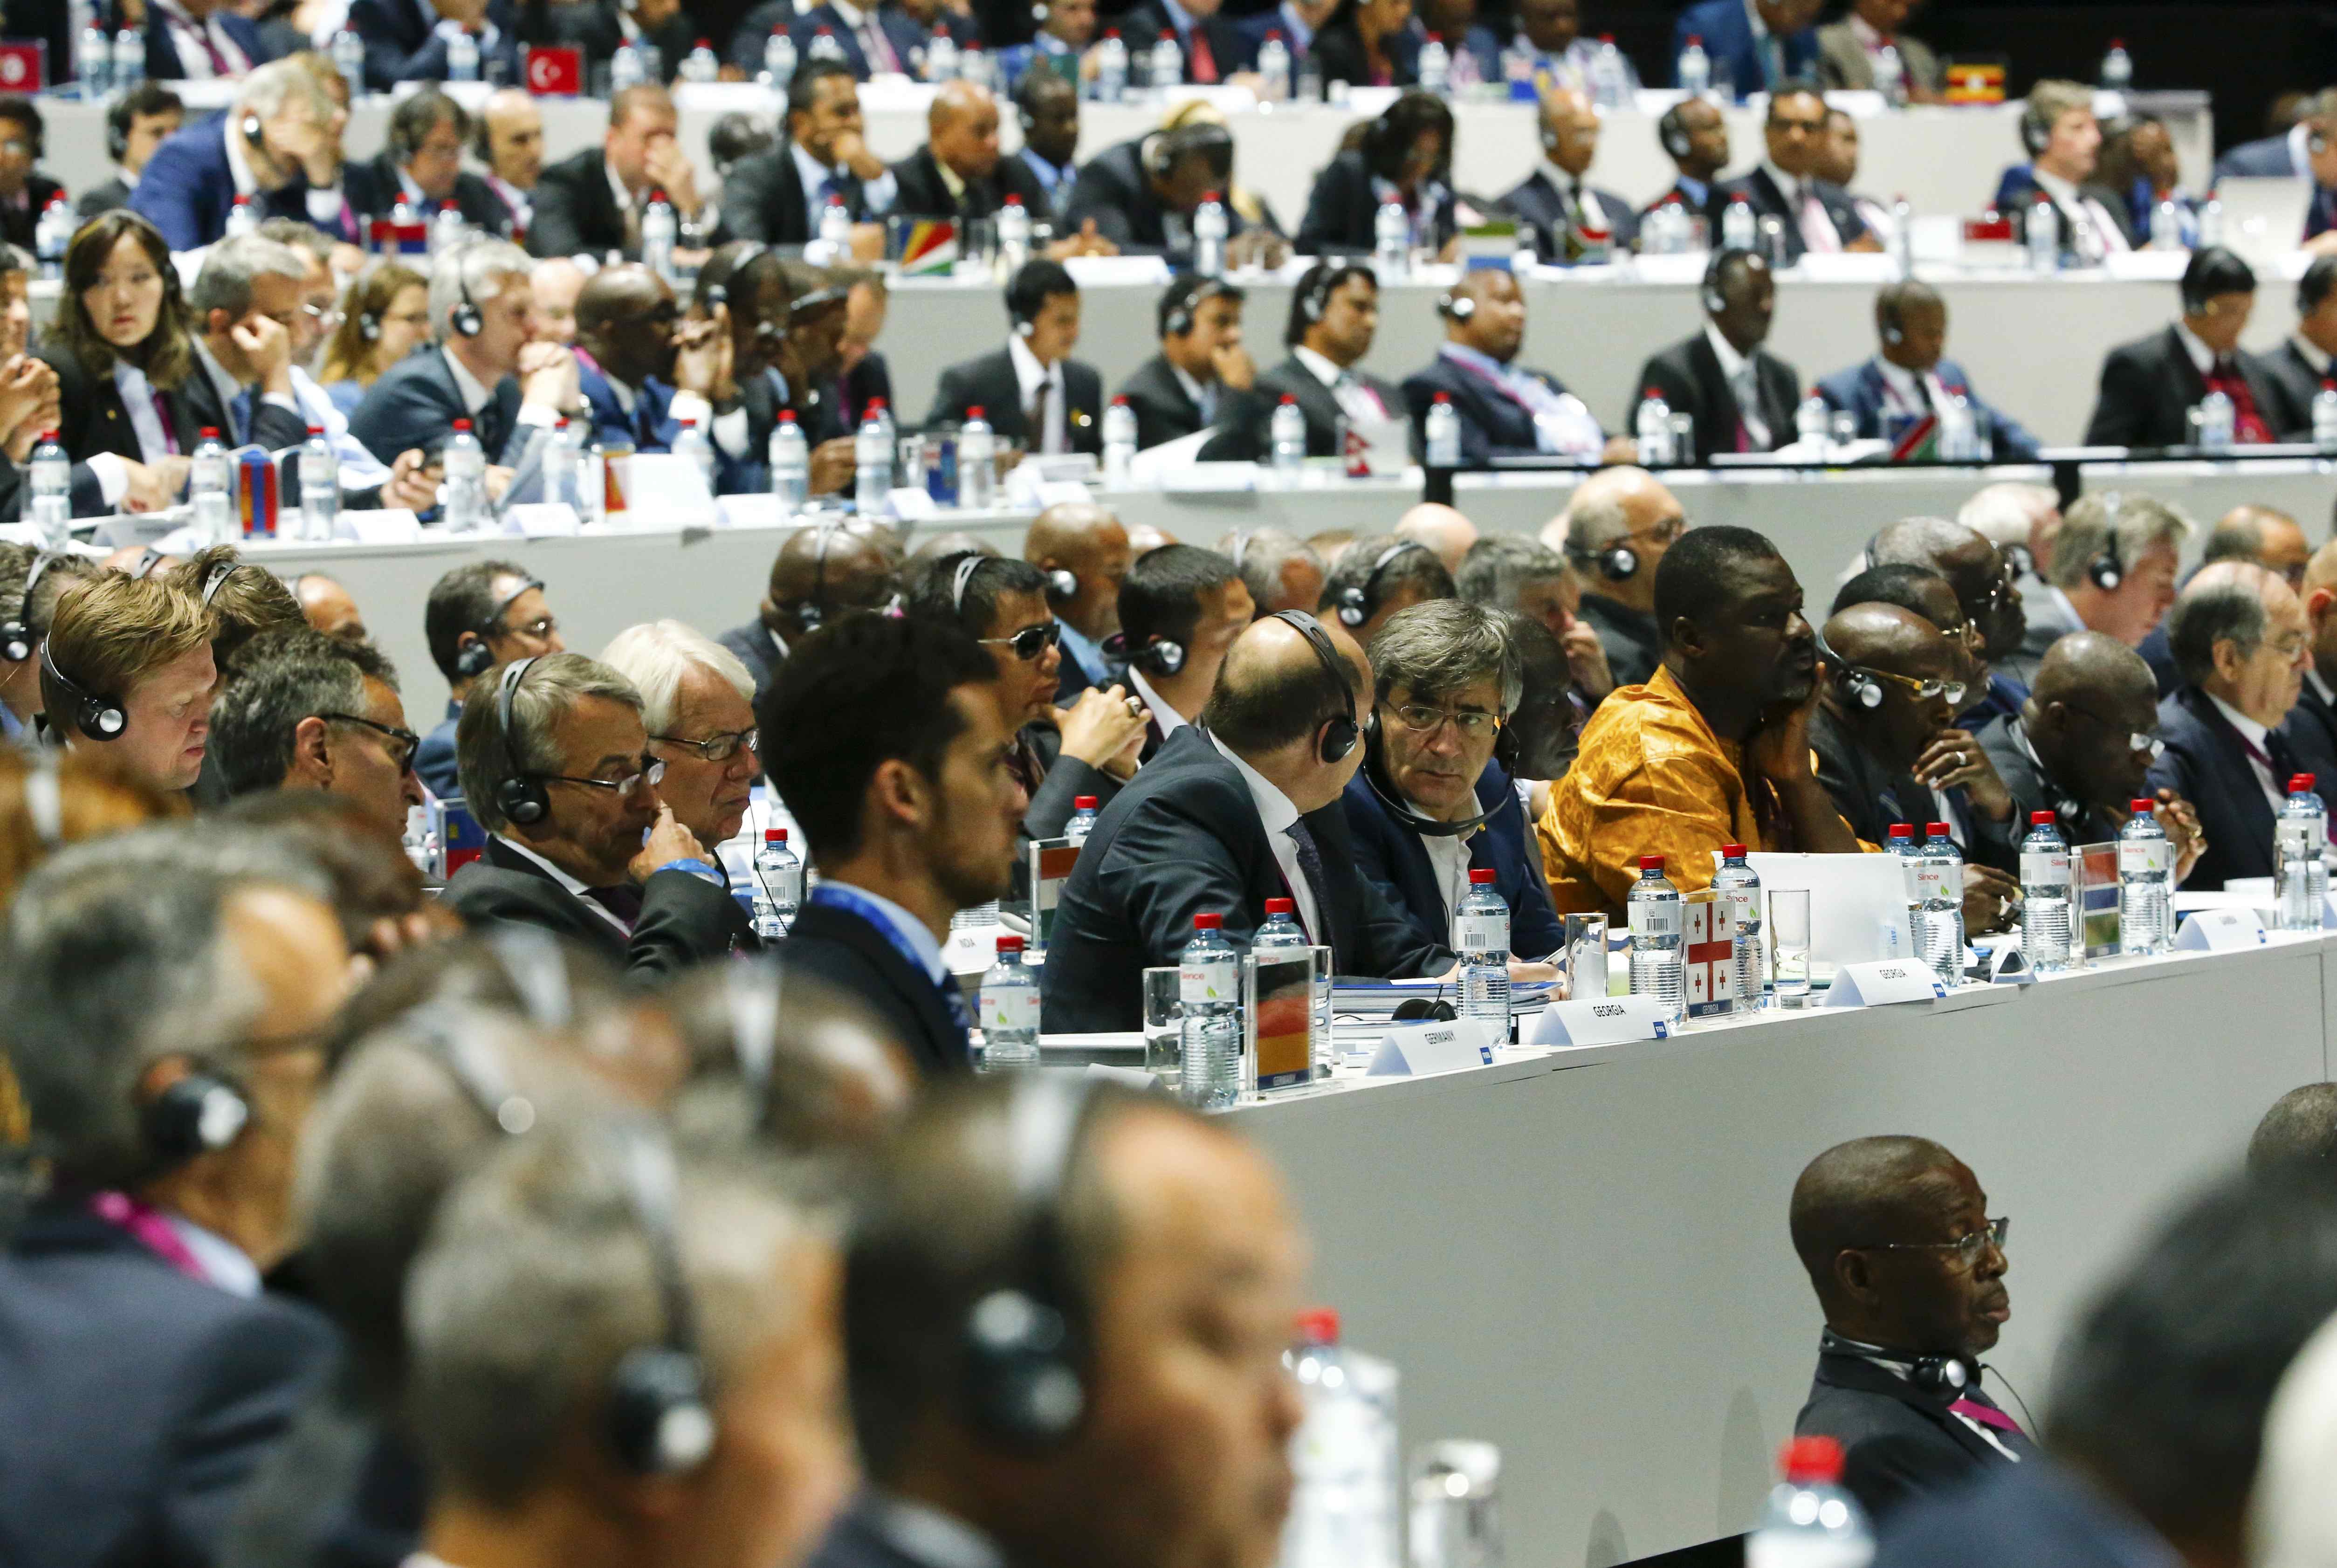 Participants attend the 65th FIFA Congress in Zurich, Switzerland, following a hoax bomb threat.